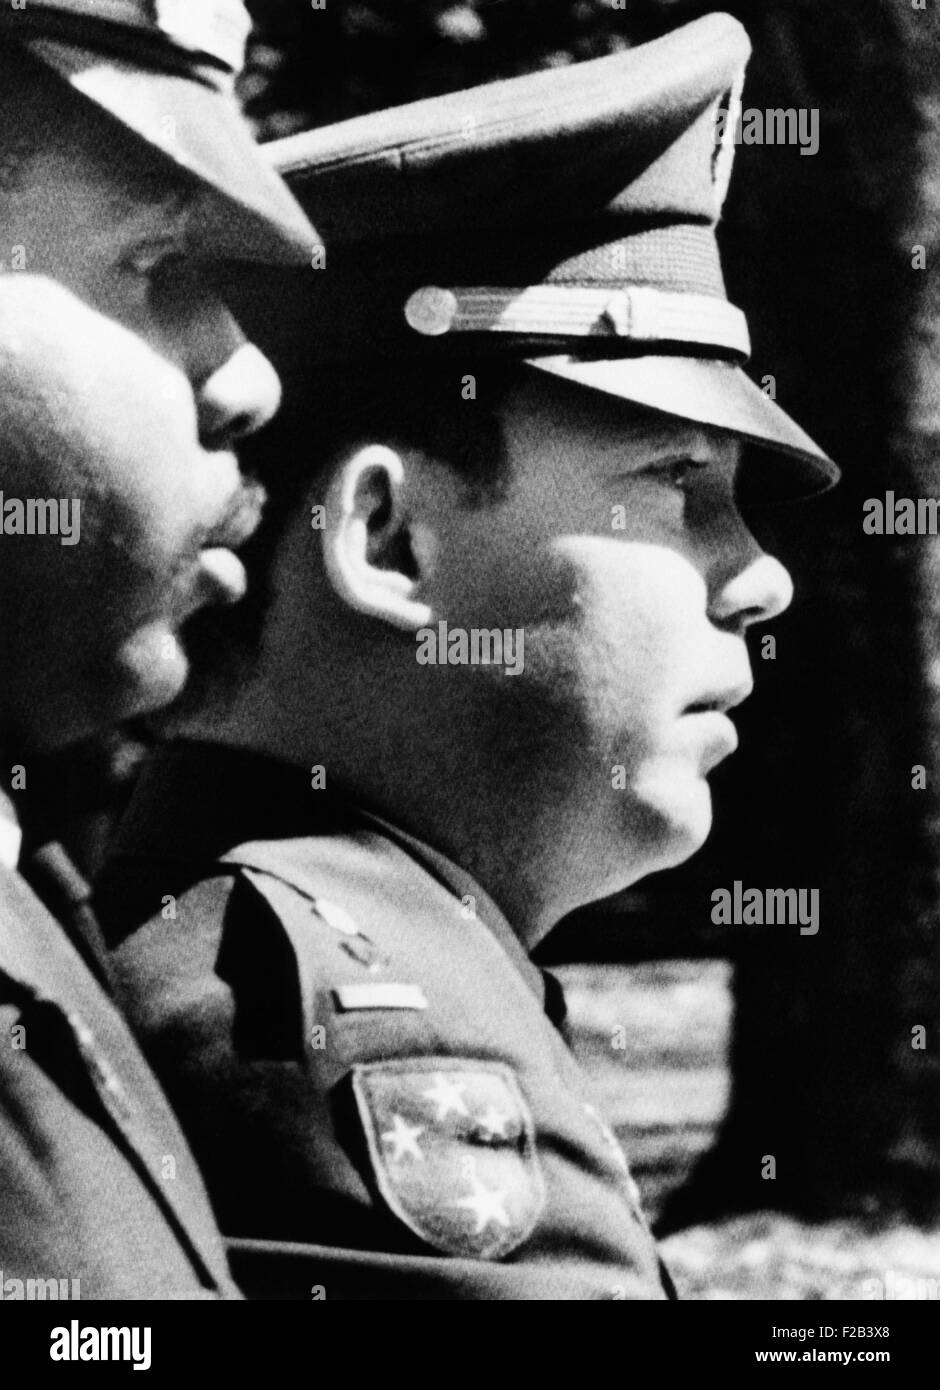 Lt. William L. Calley, Jr. escorted to the Fort Benning stockade on March 31, 1971. He had just heard the jury pronounce a life Stock Photo